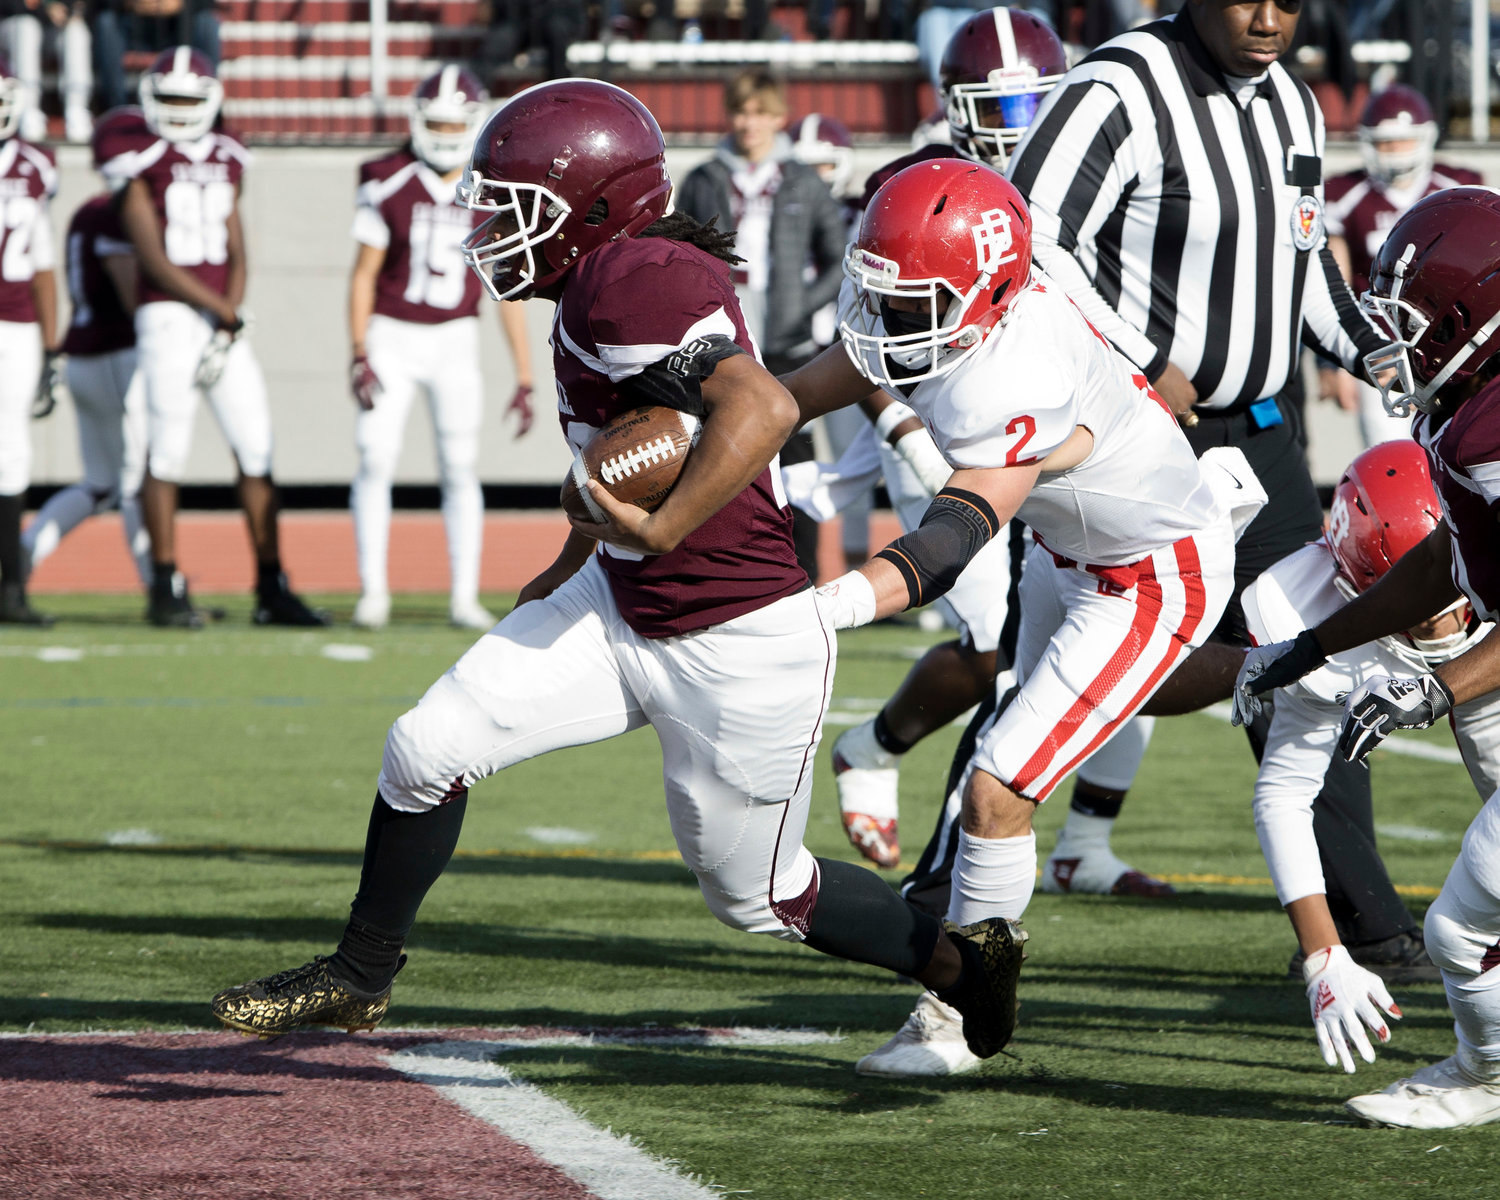 East Providence’s Justin Fiore chases after the LaSalle running back.